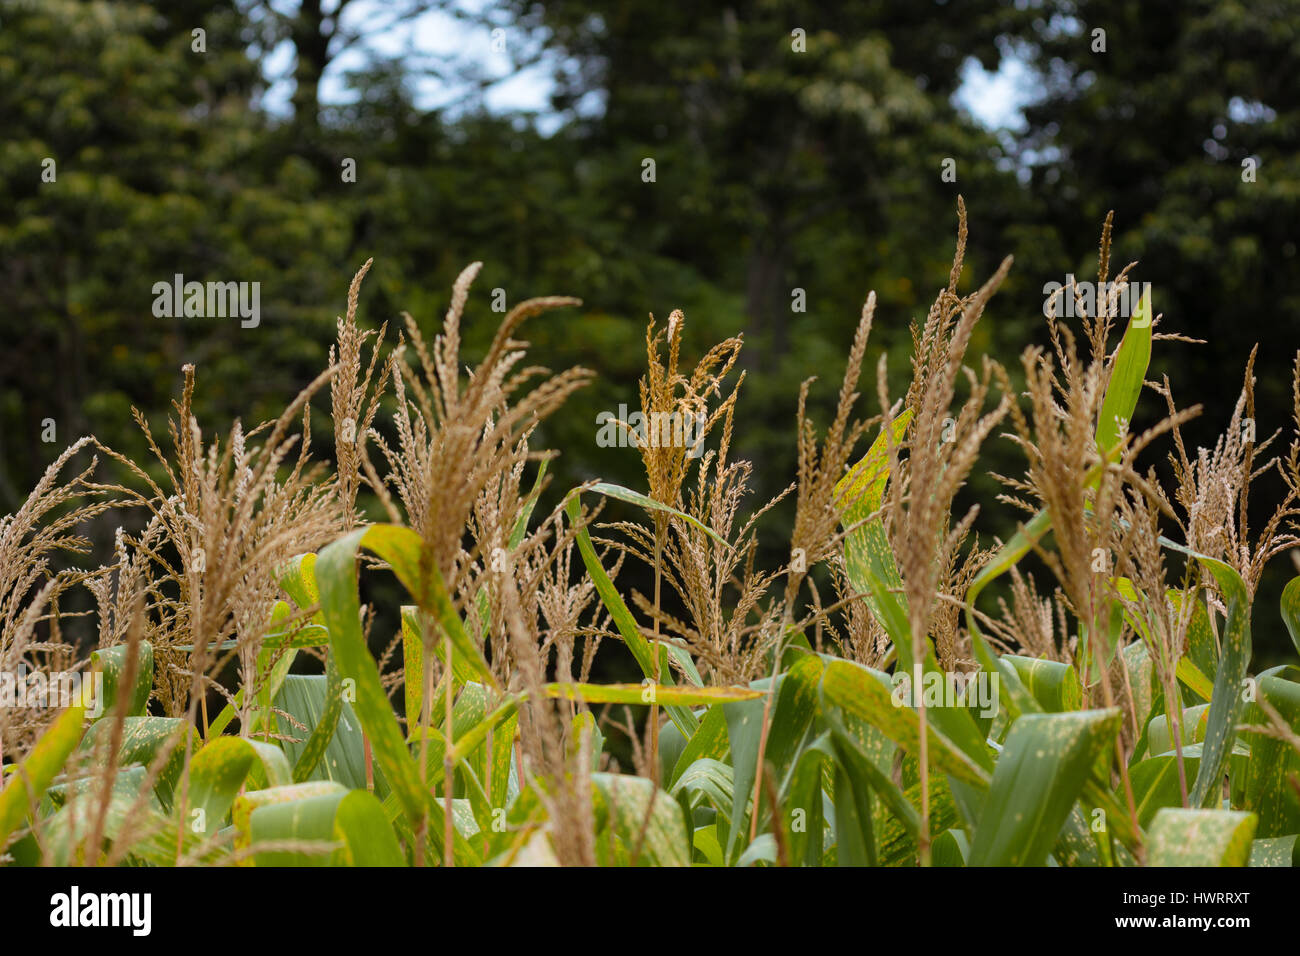 The heads of corn maze in a farmers field with dense tree back ground. Stock Photo